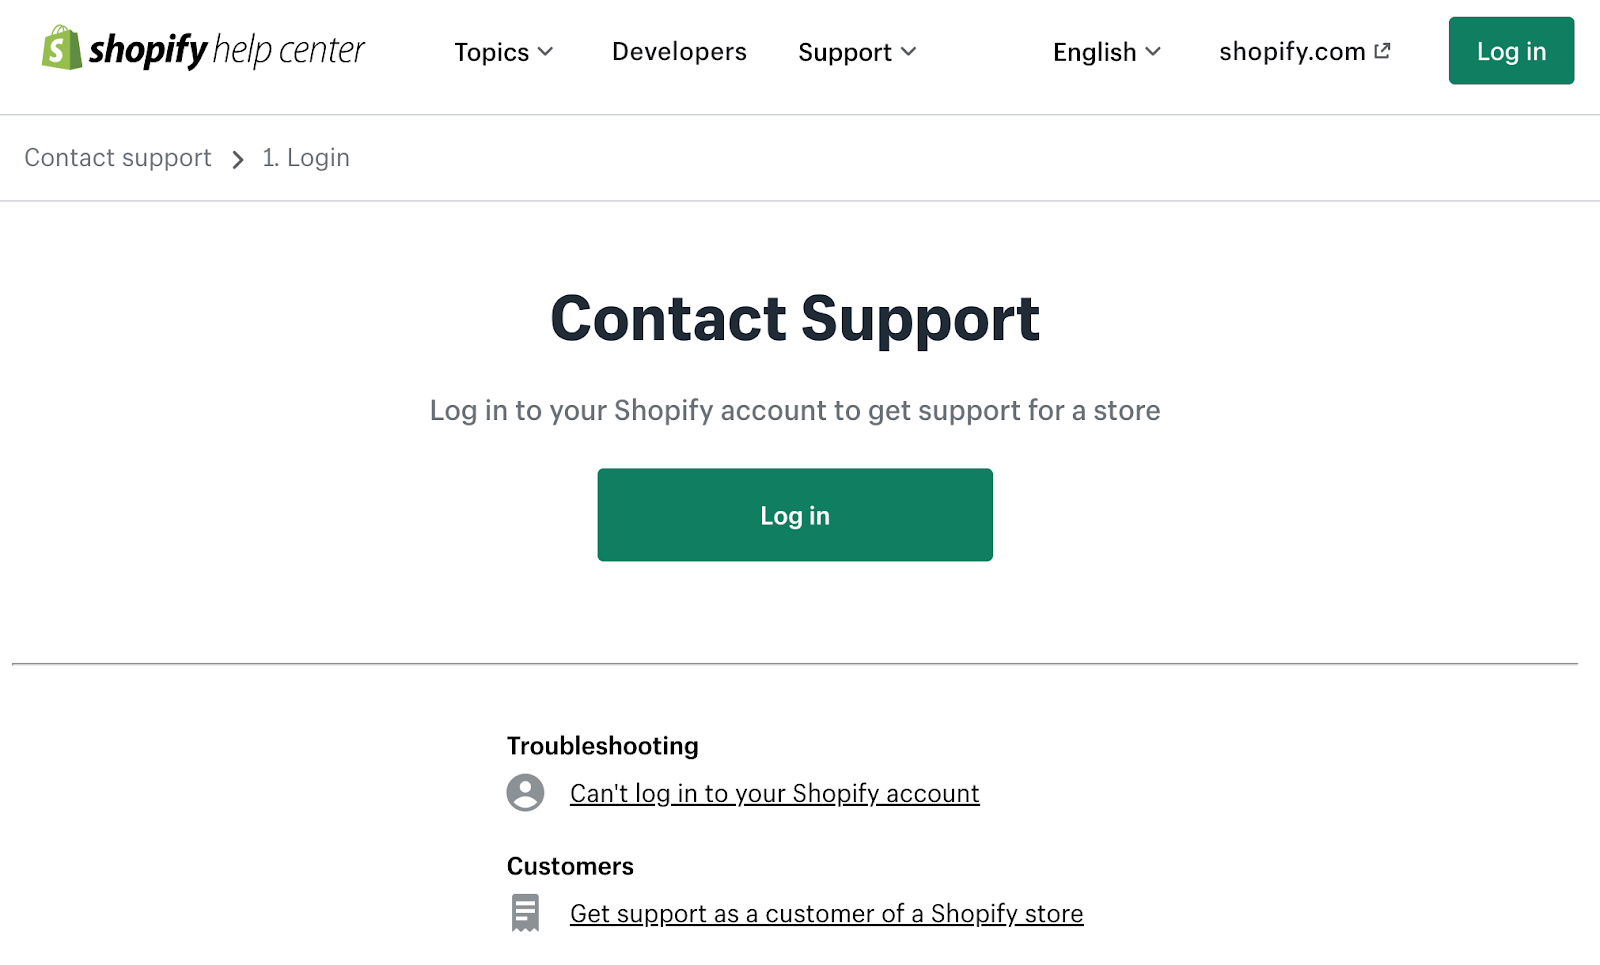 Shopify Contact Support page